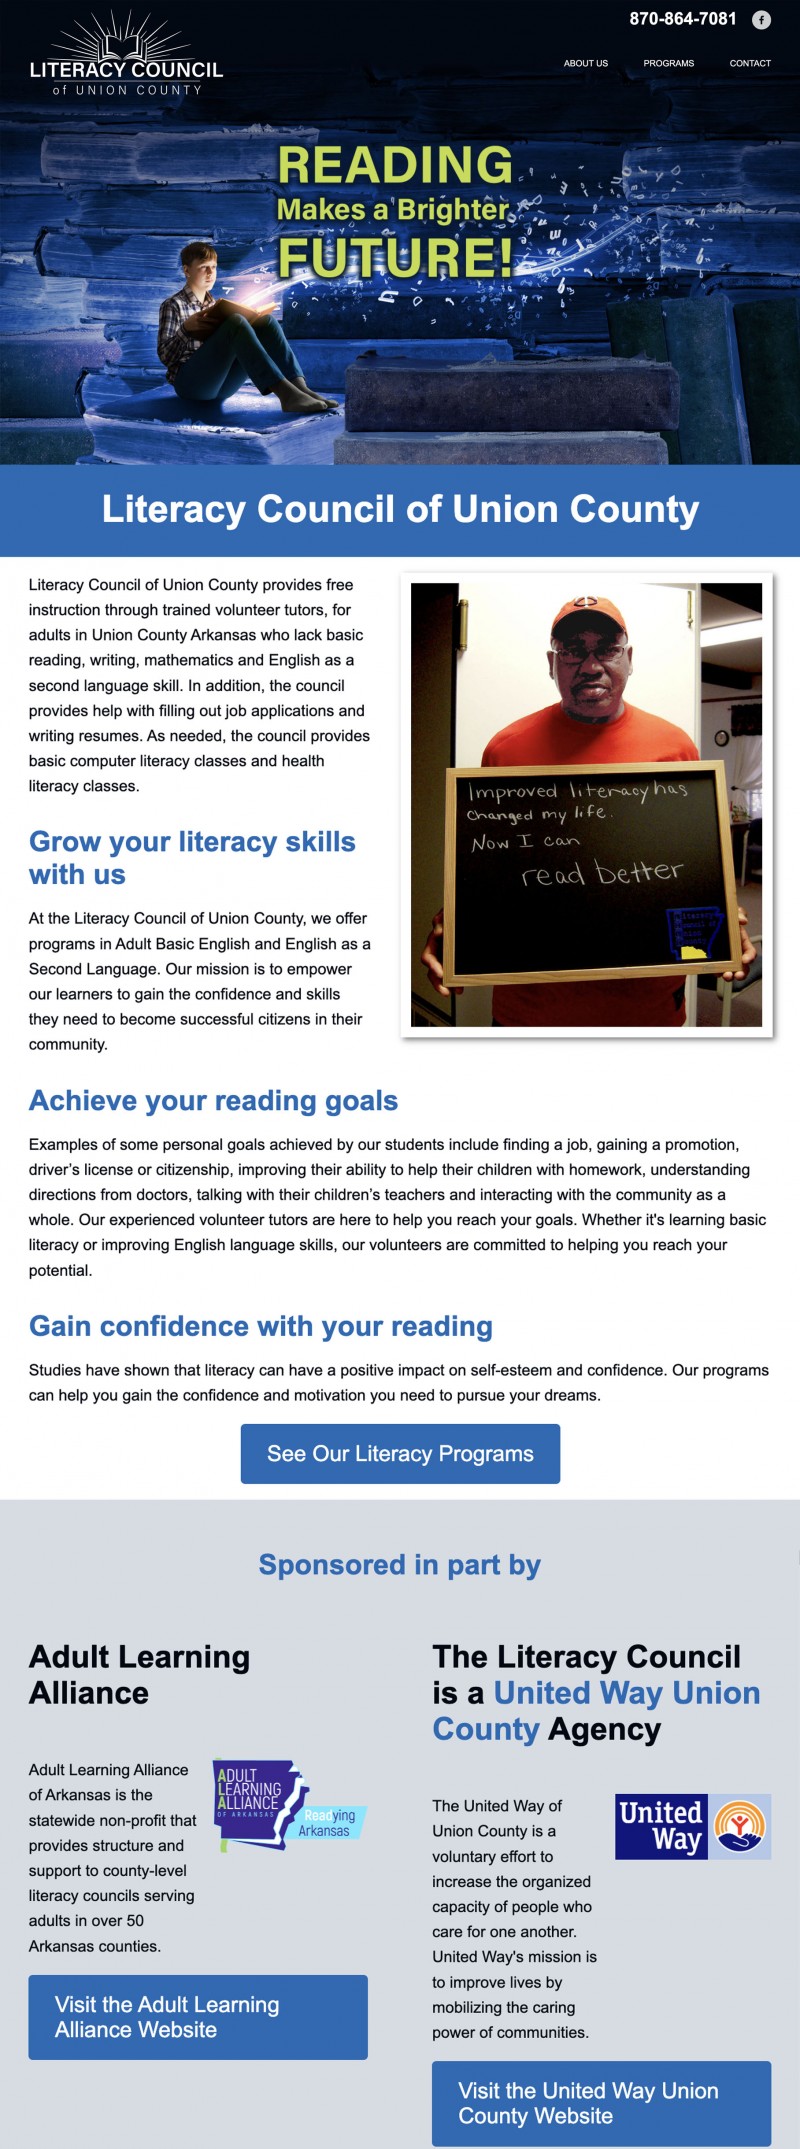 Literacy Council of Union County